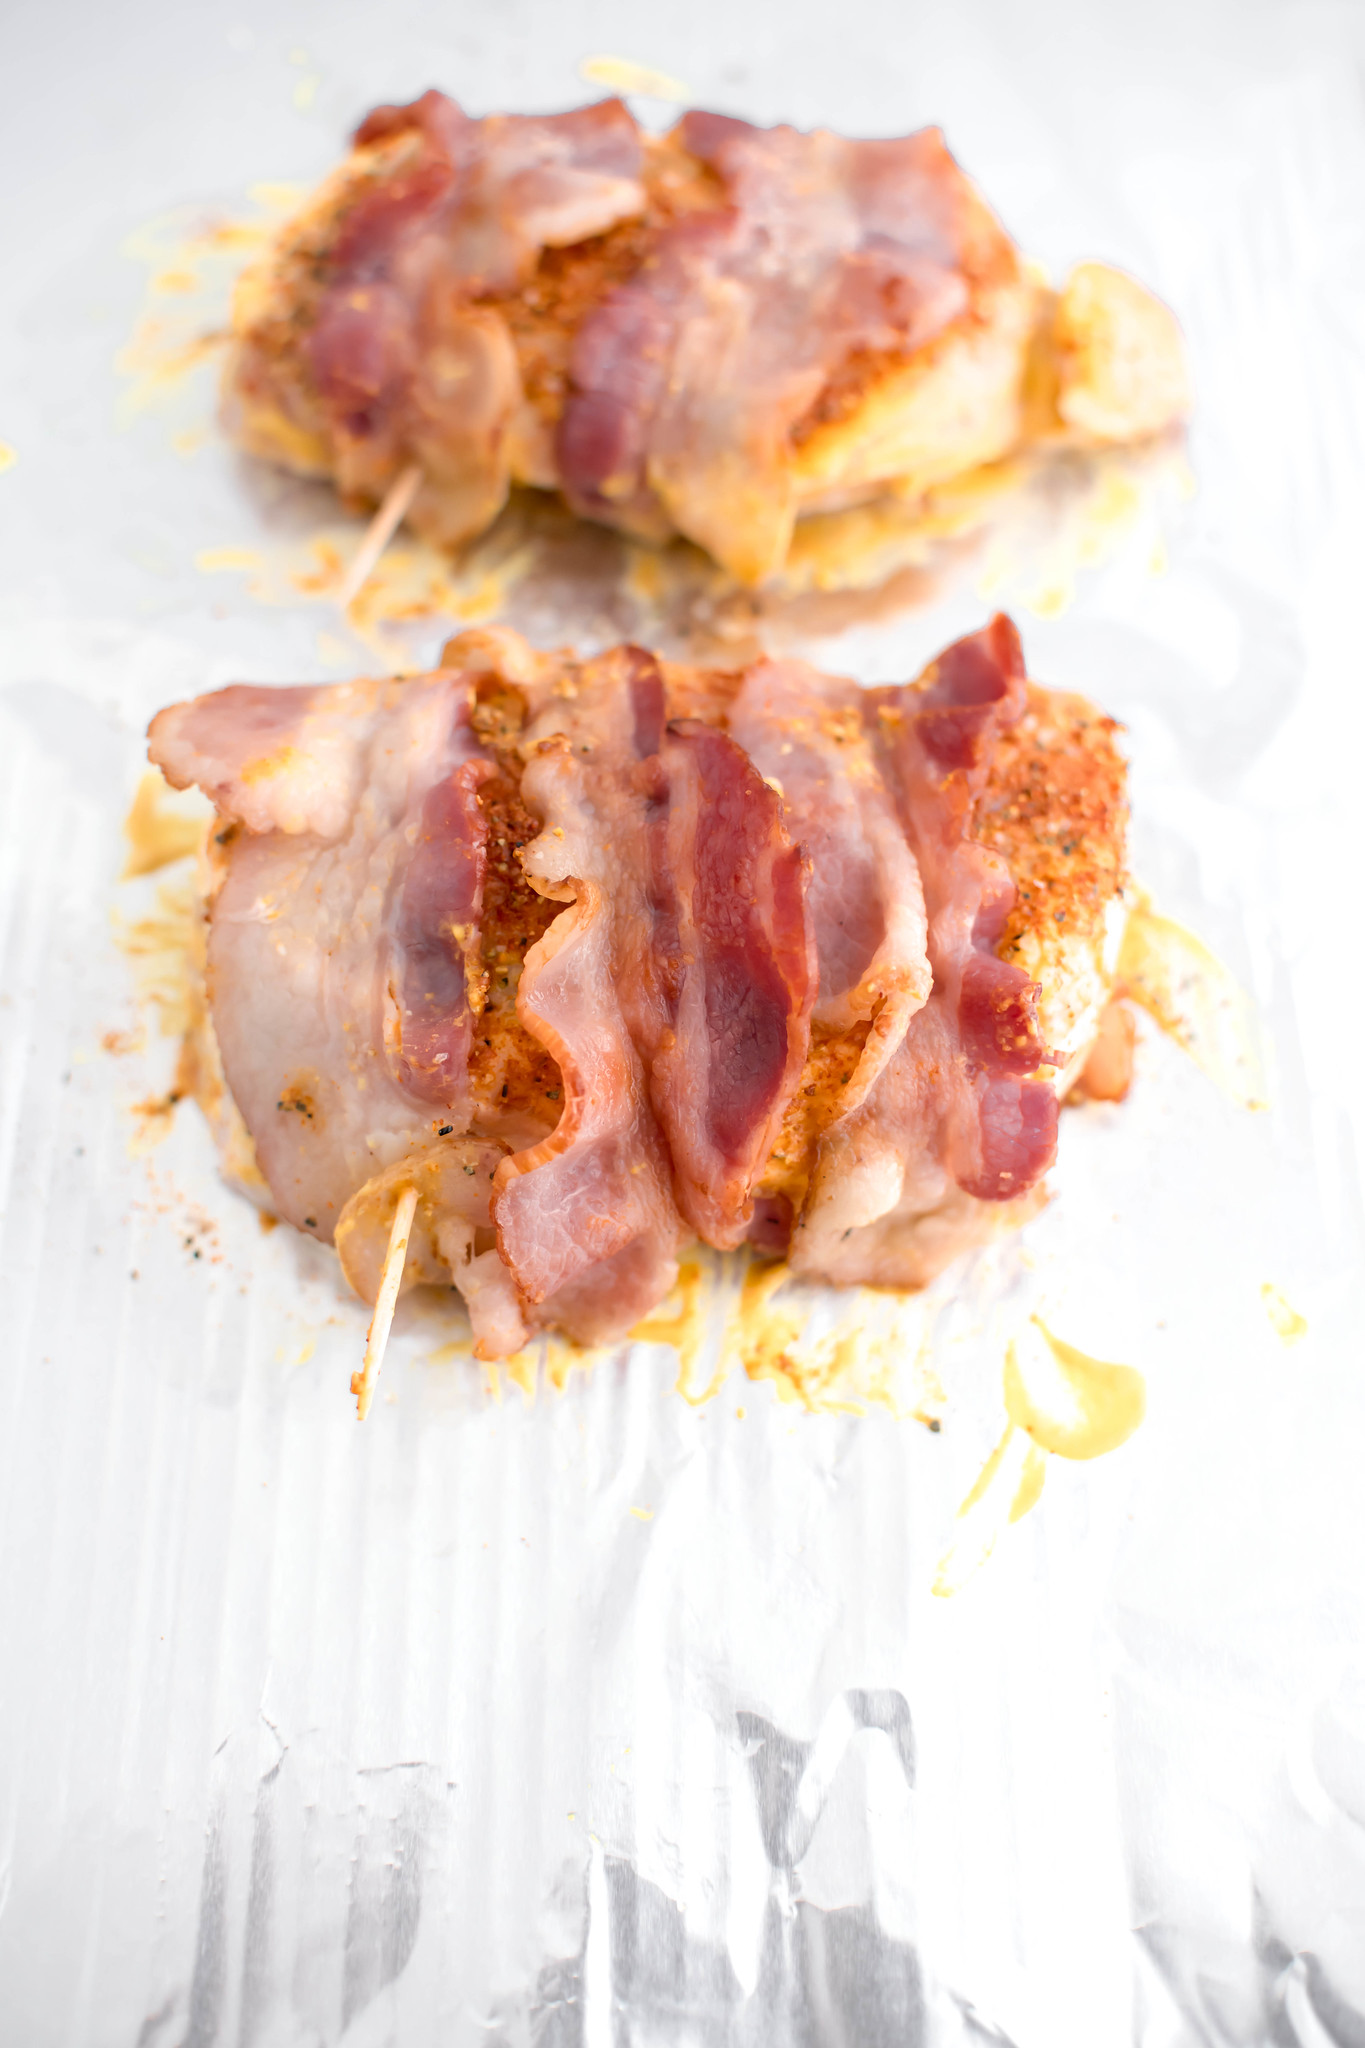 Pork chops rubbed in mustard and spices and wrapped with bacon on a baking sheet.